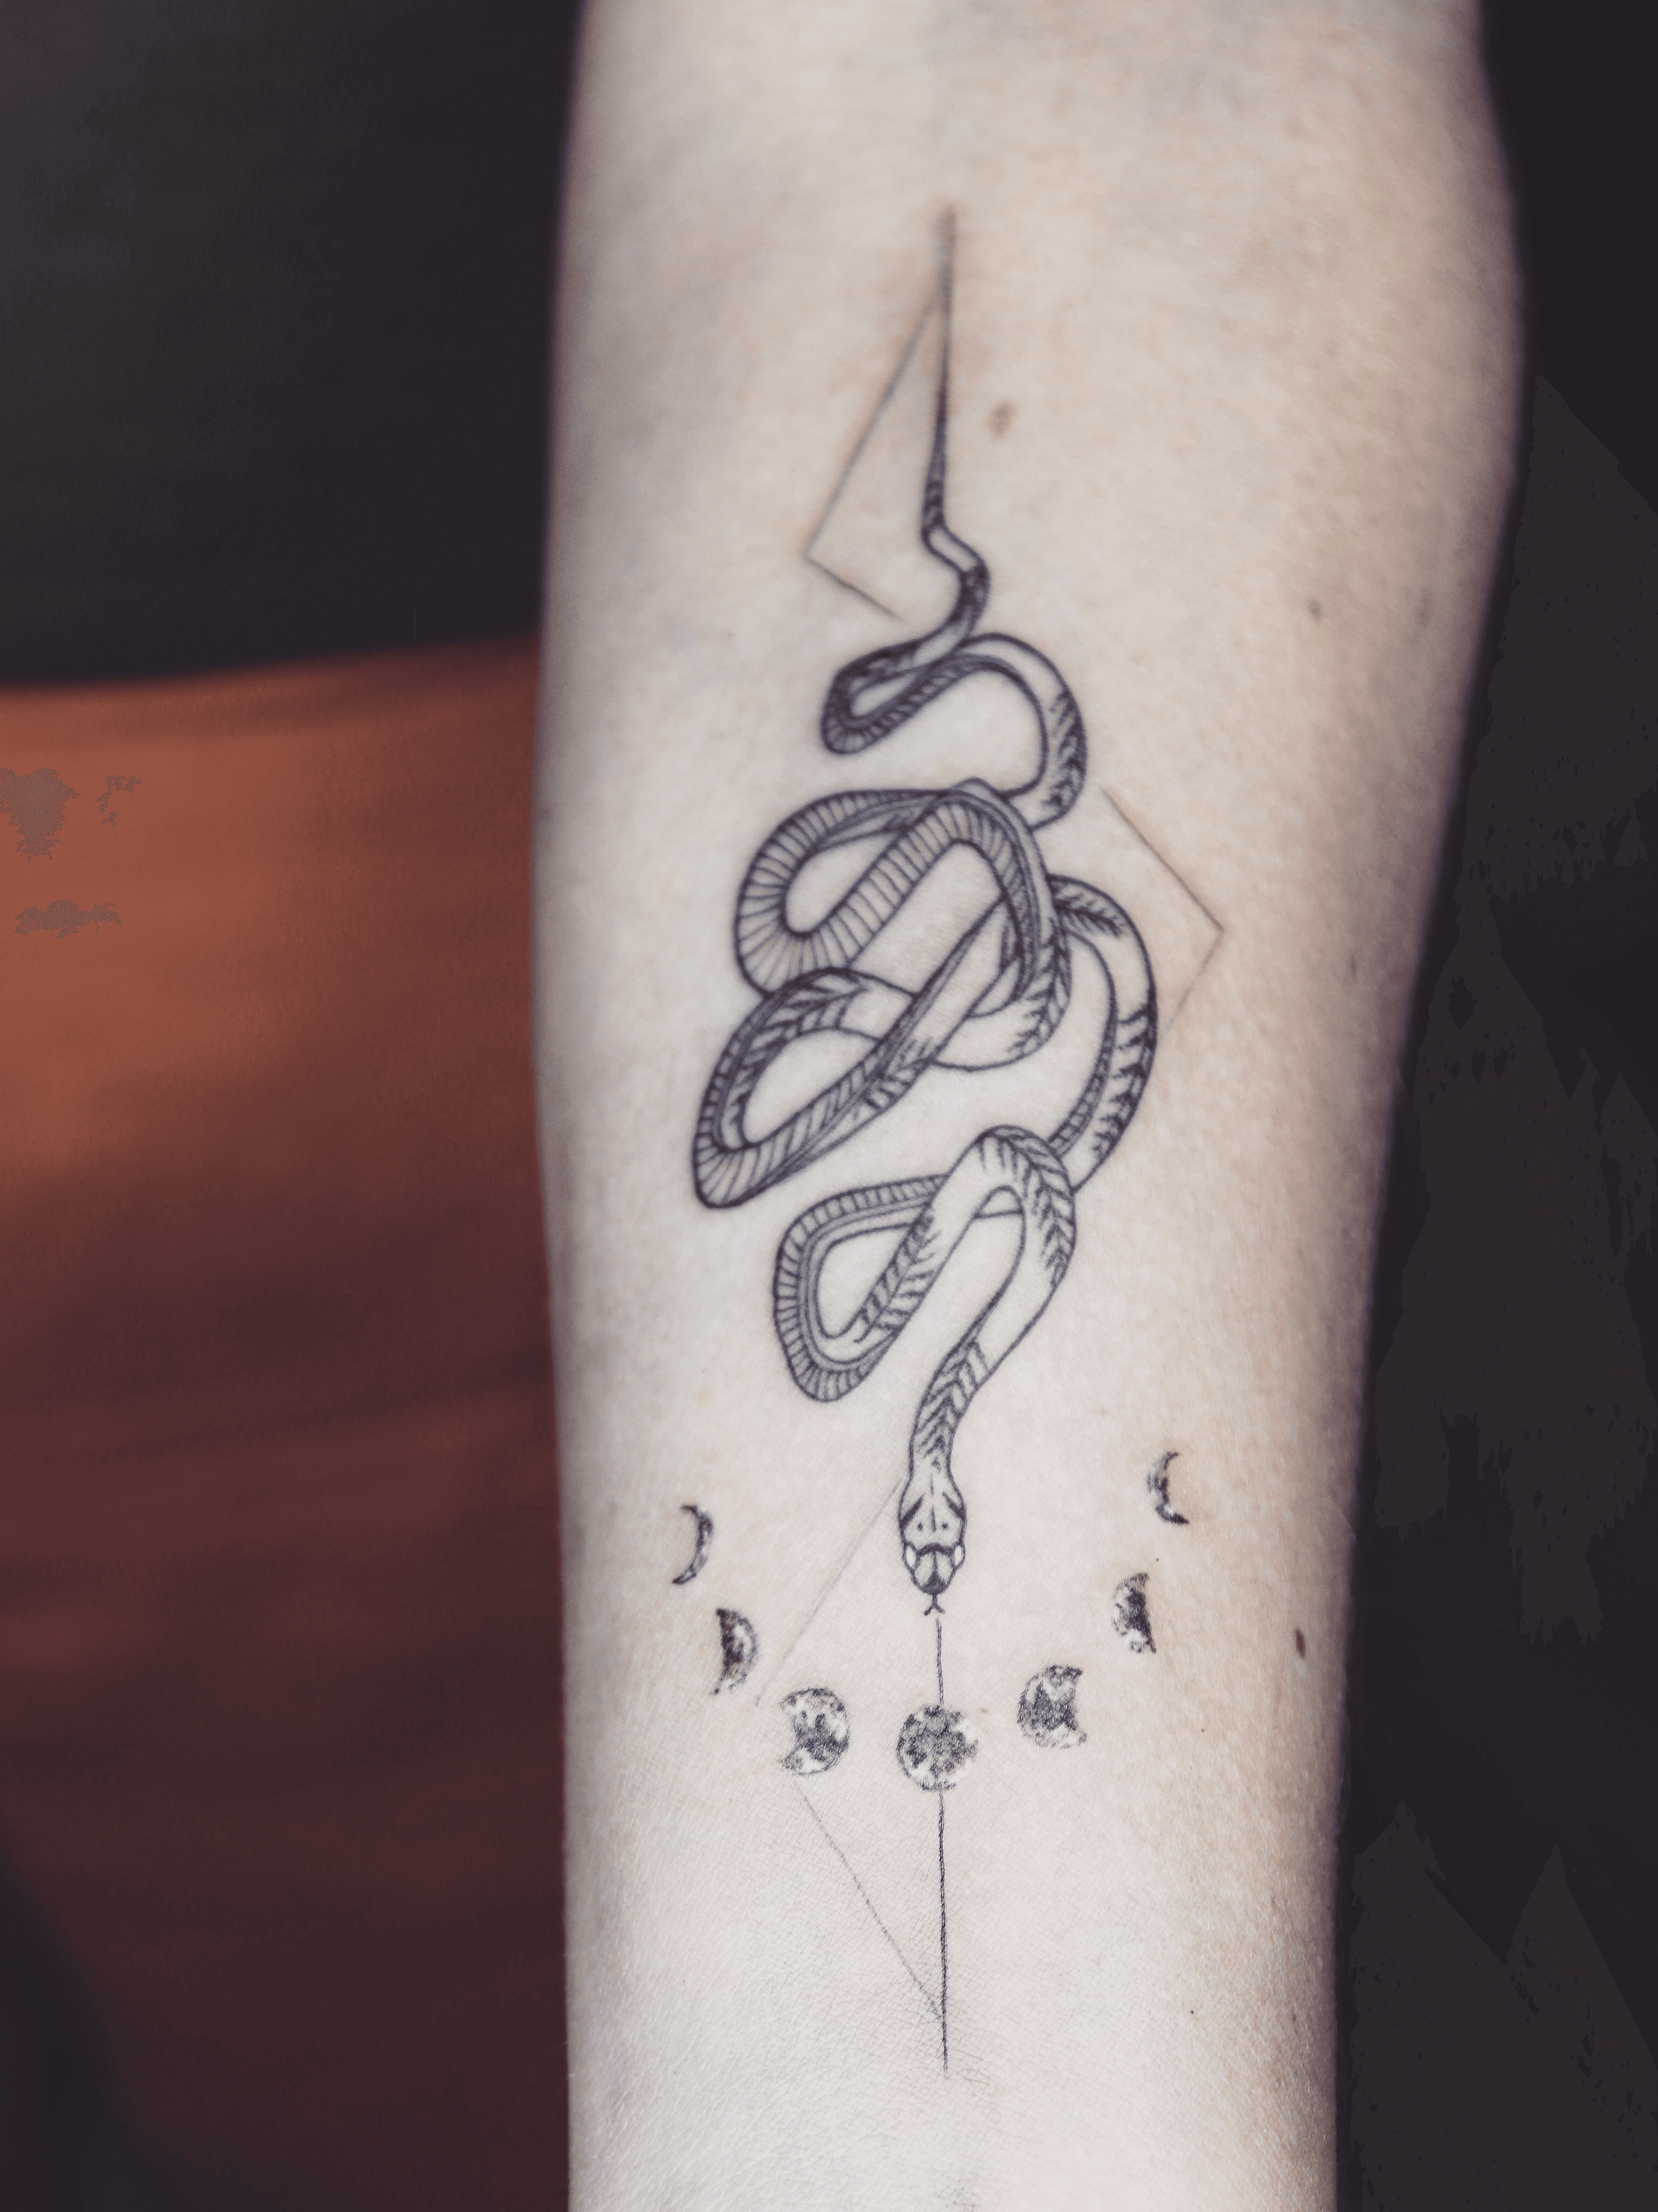 North Star Tattoo  Geometric snake by Angie from earlier this week   Facebook